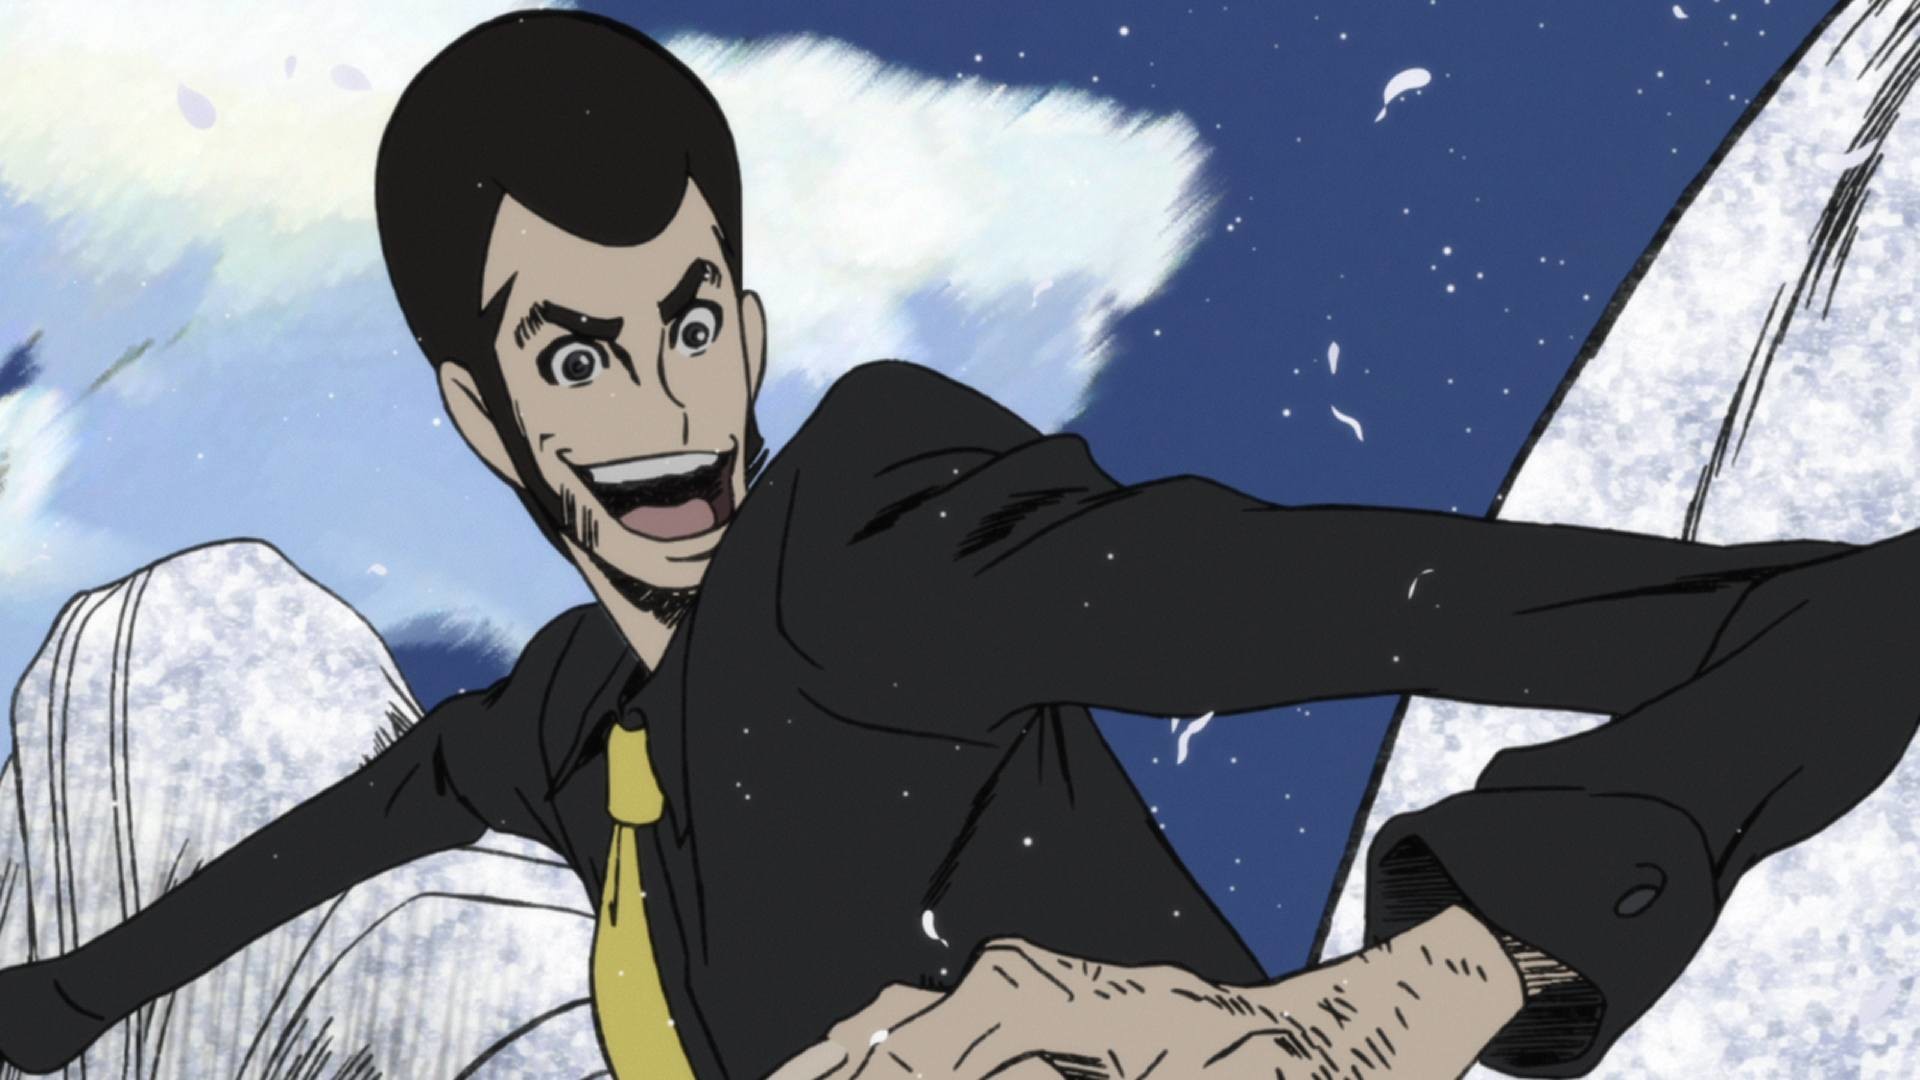 1920x1080 Pin Lupin The Third Castle Of Cagliostro Wallpaper 6 Hd Desktop on 